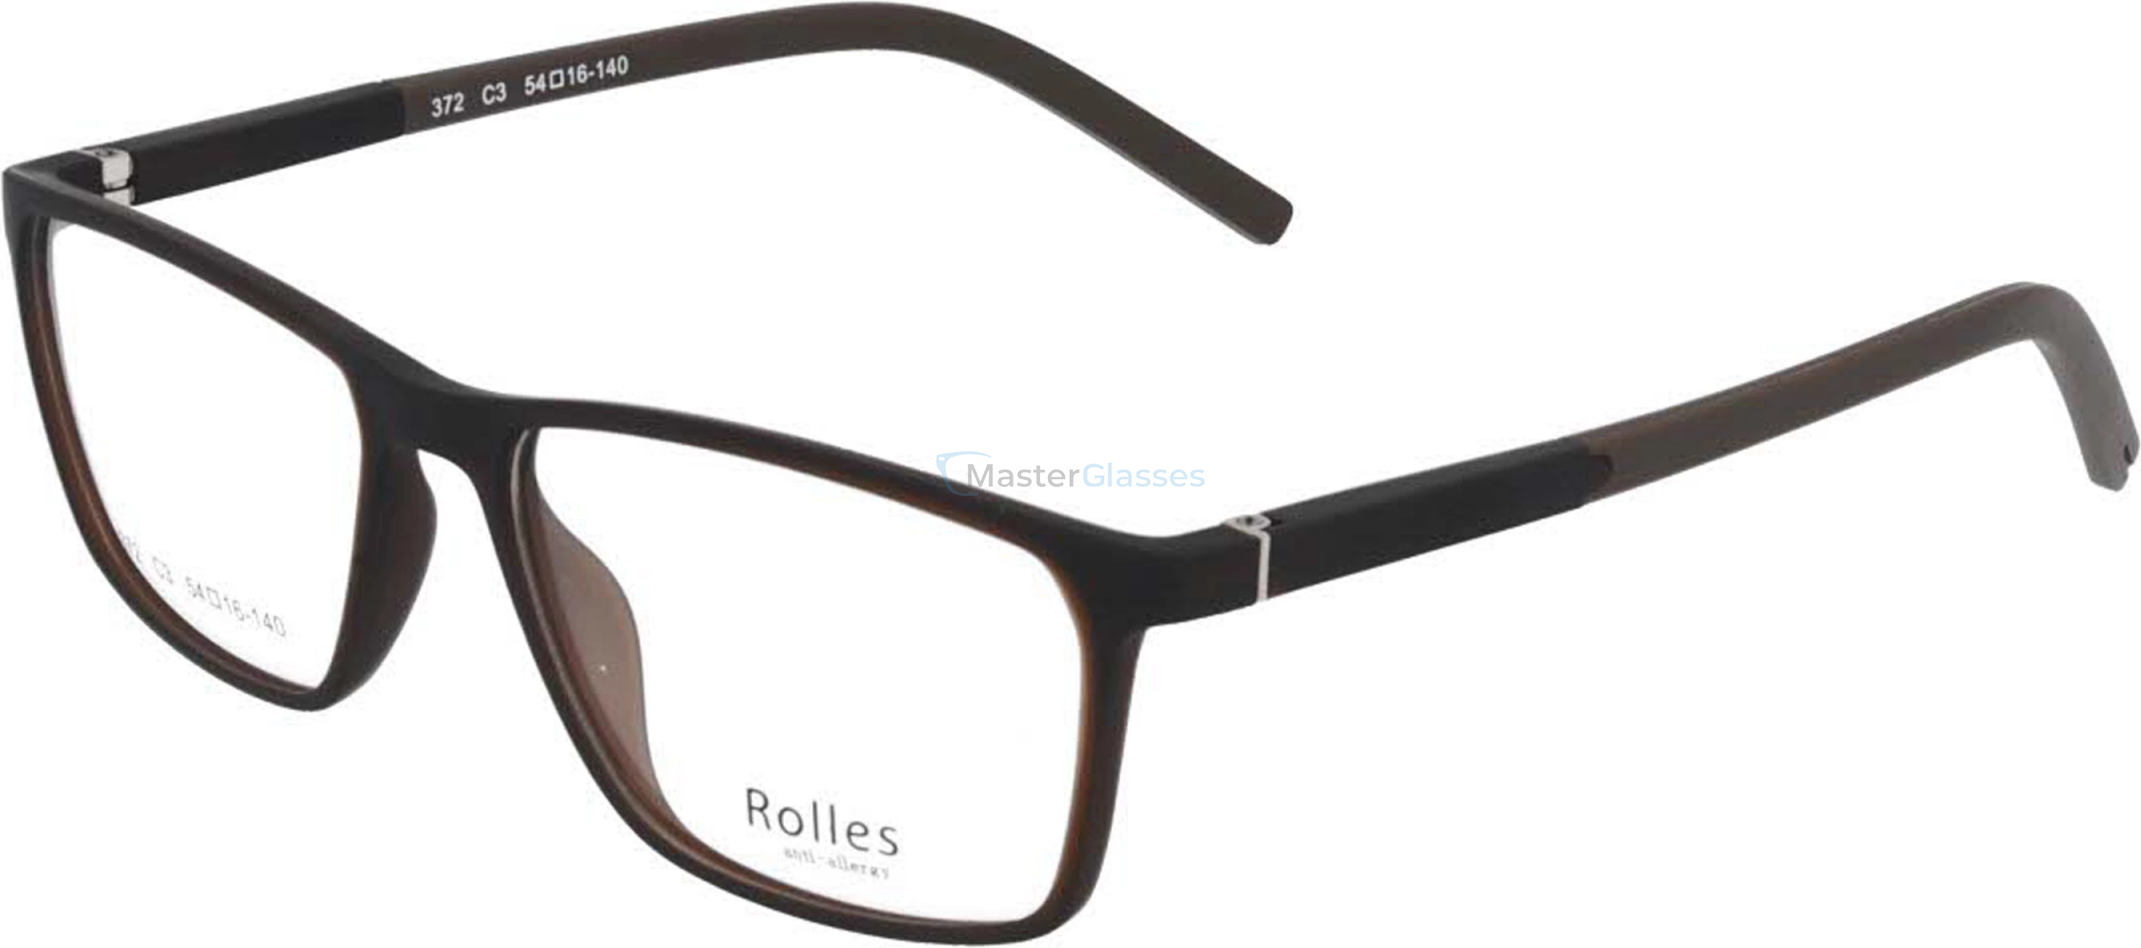  Rolles 372 03